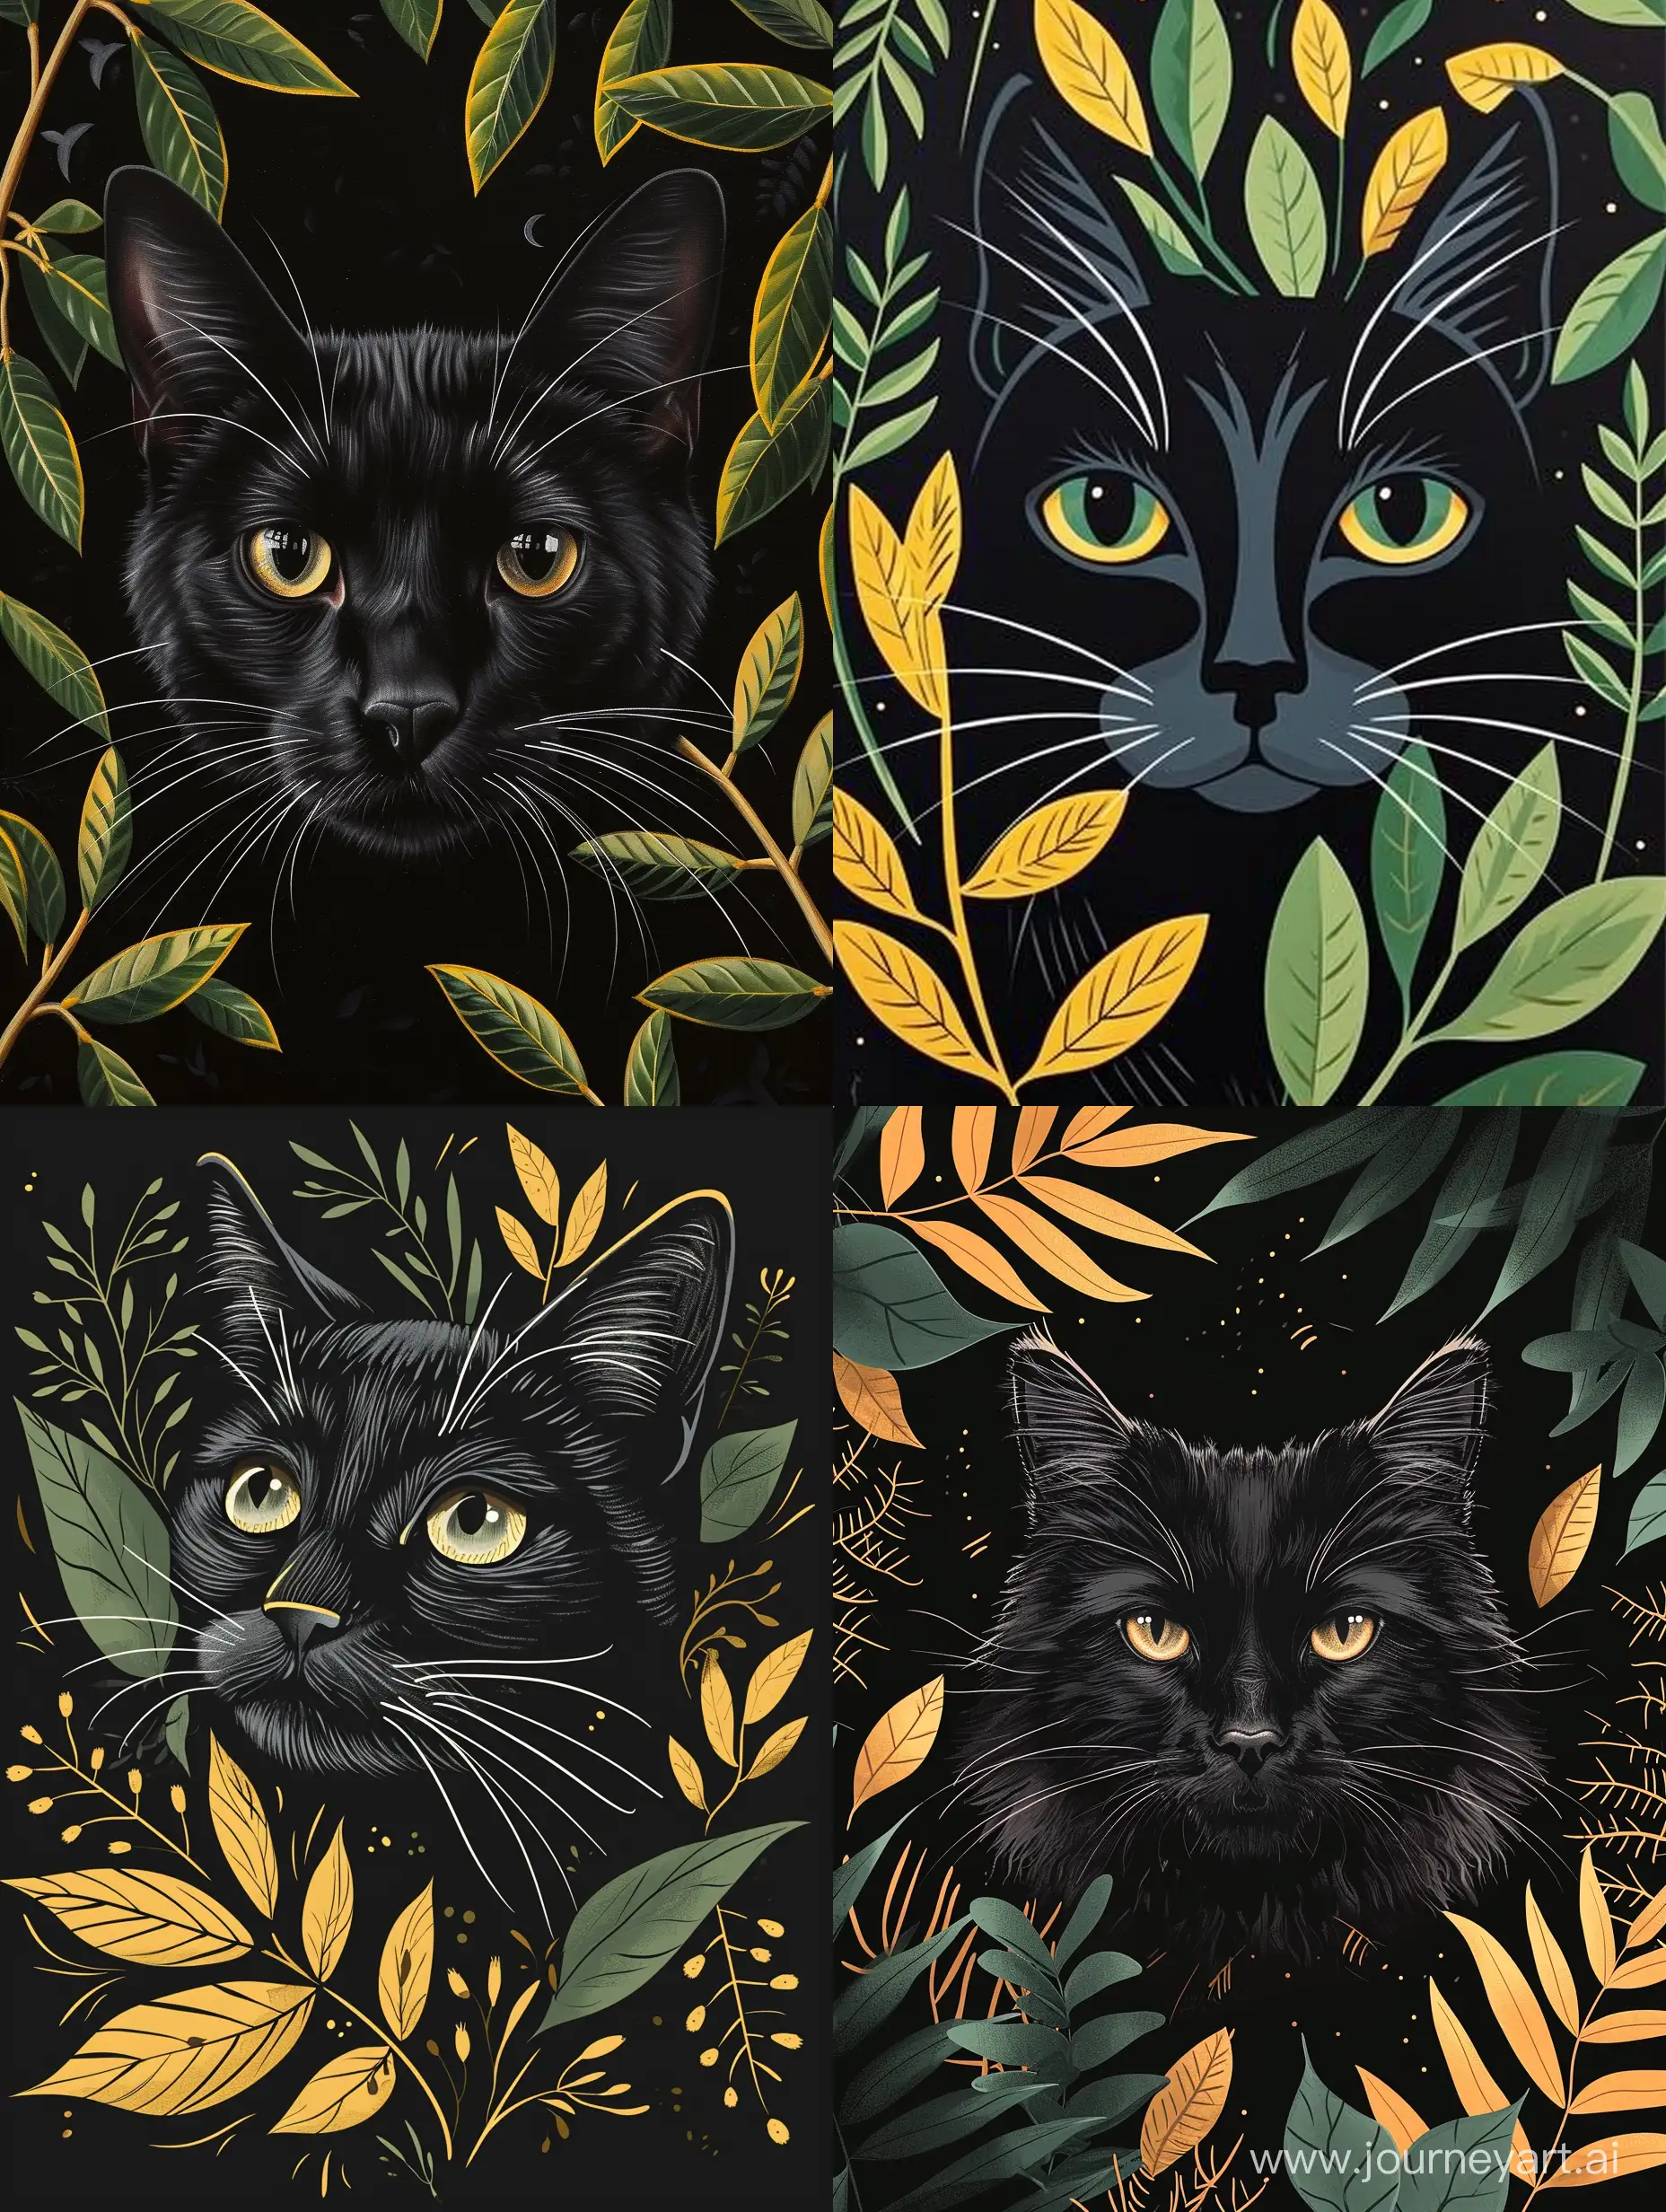 Elegant-Black-Cat-Face-in-Fine-Art-Composition-with-Green-and-Yellow-Leaves